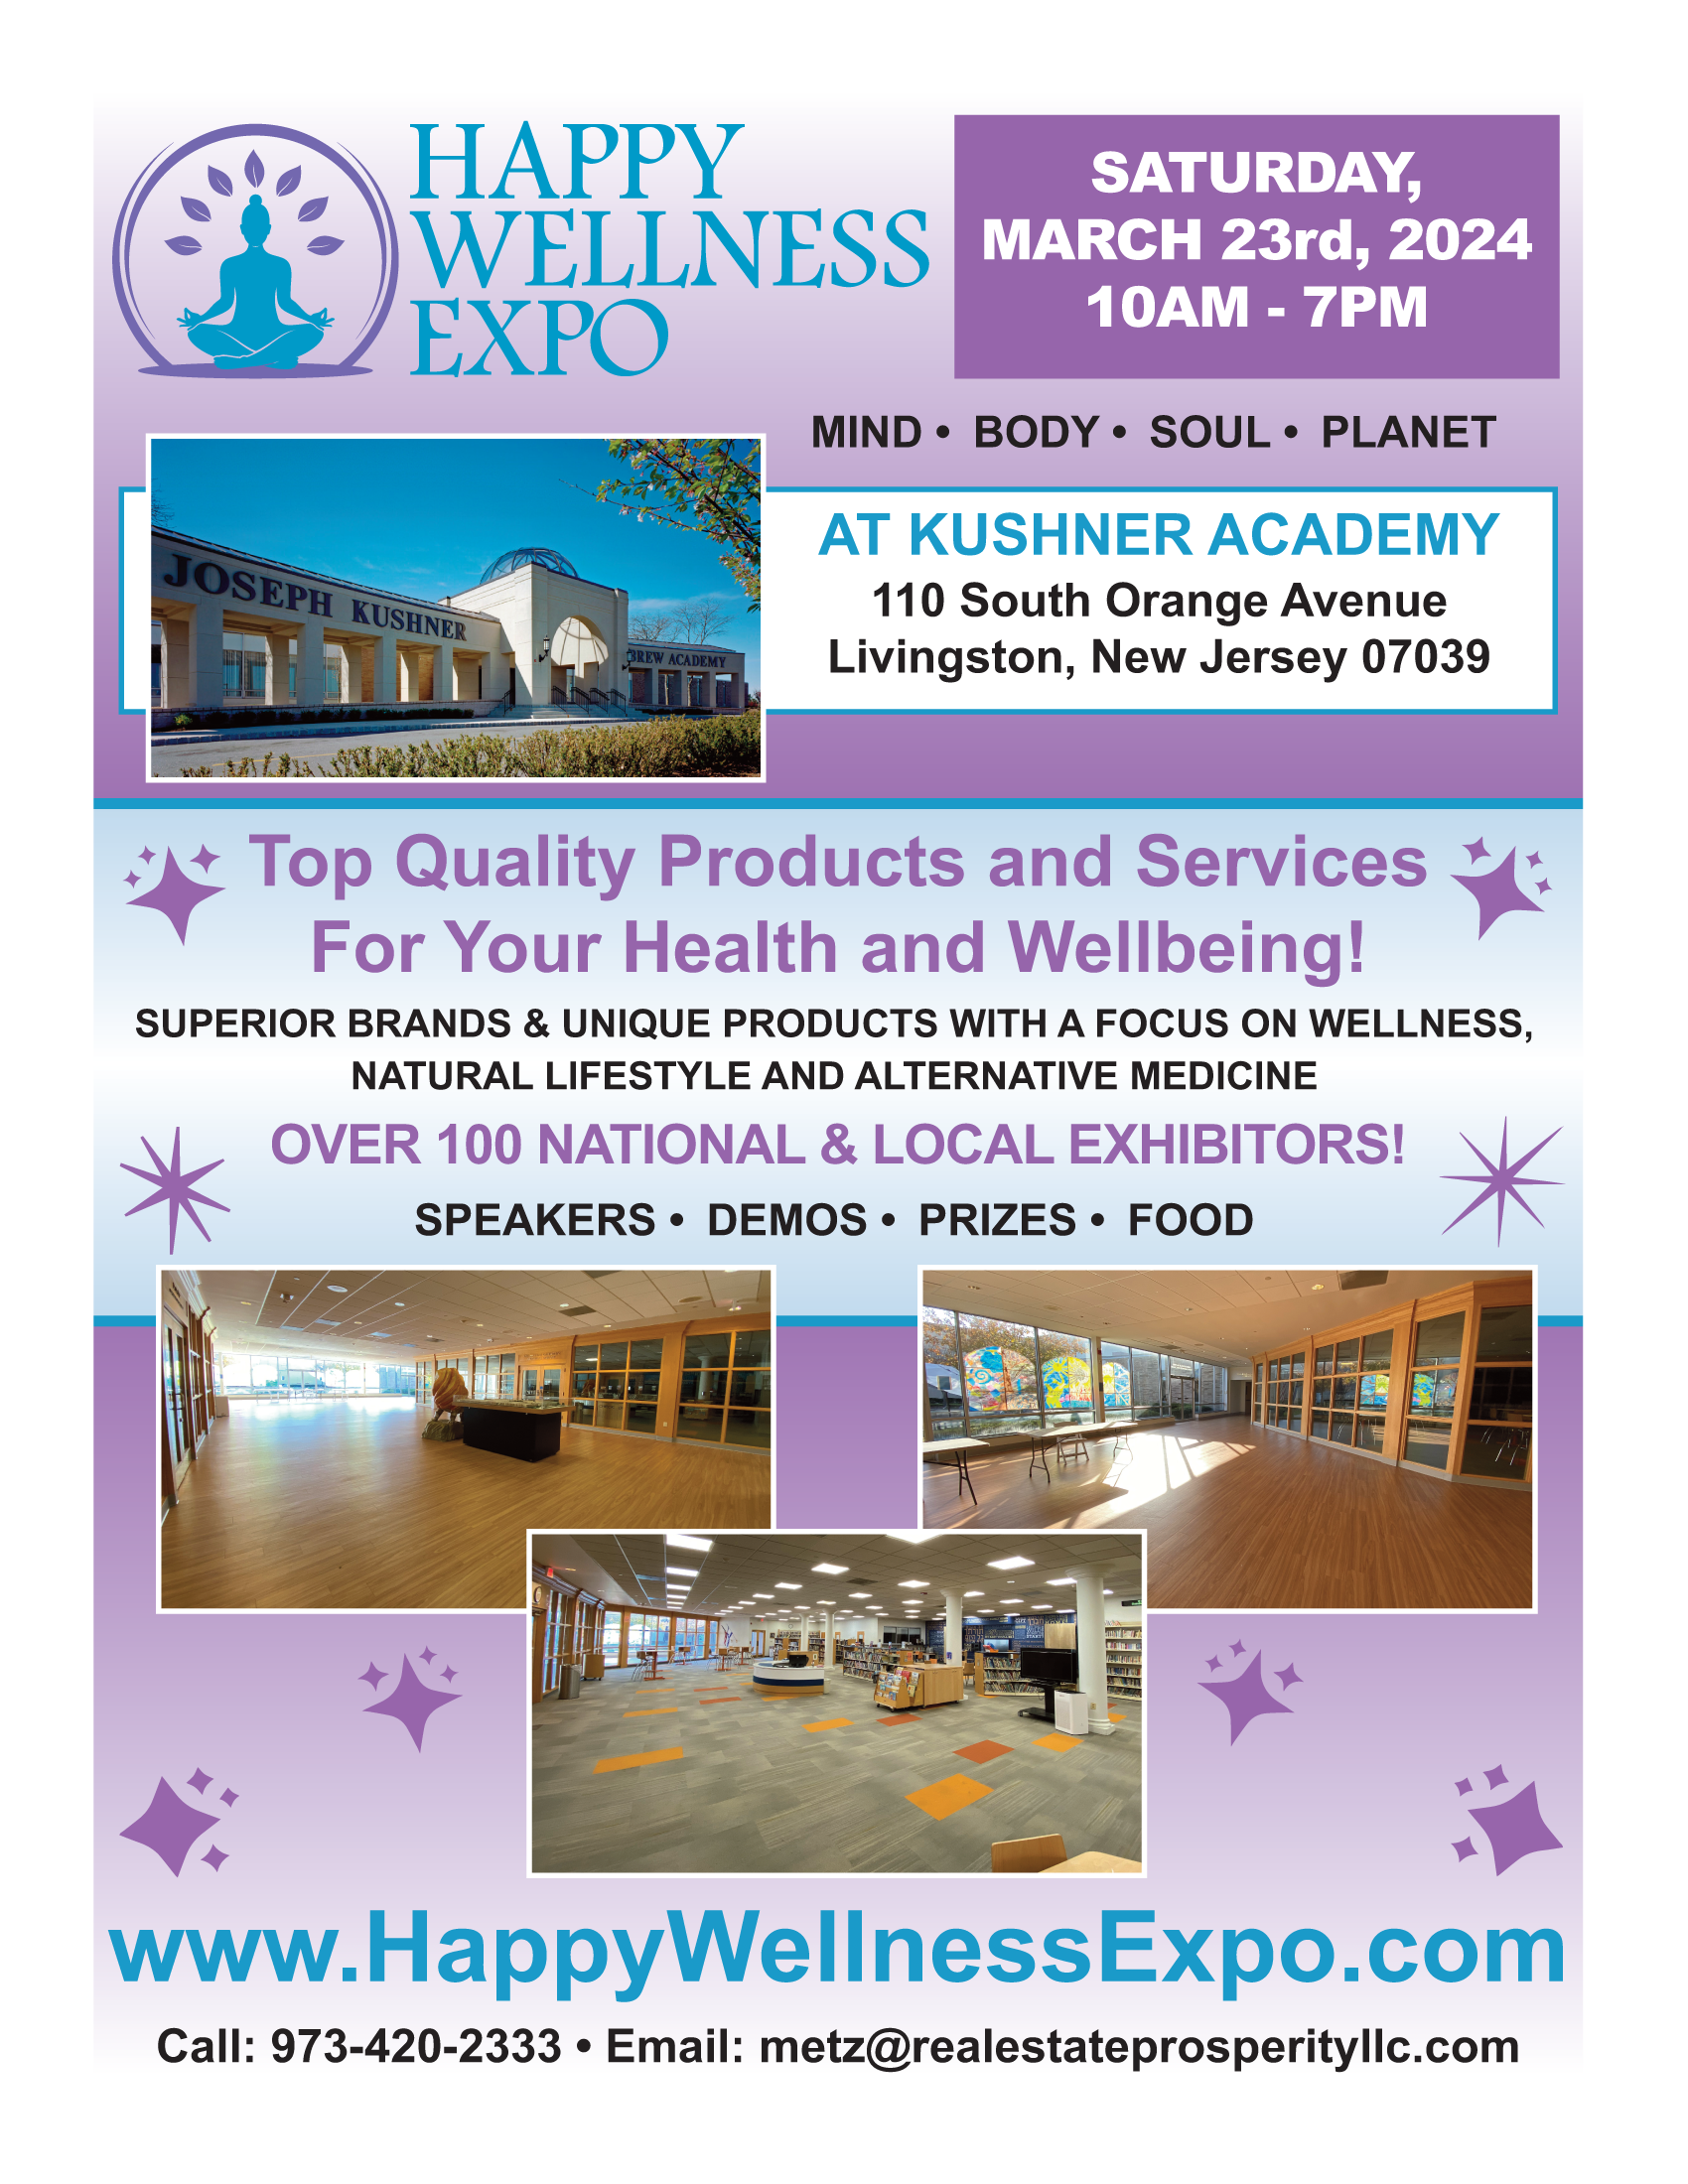 A flyer for the wellness expo.